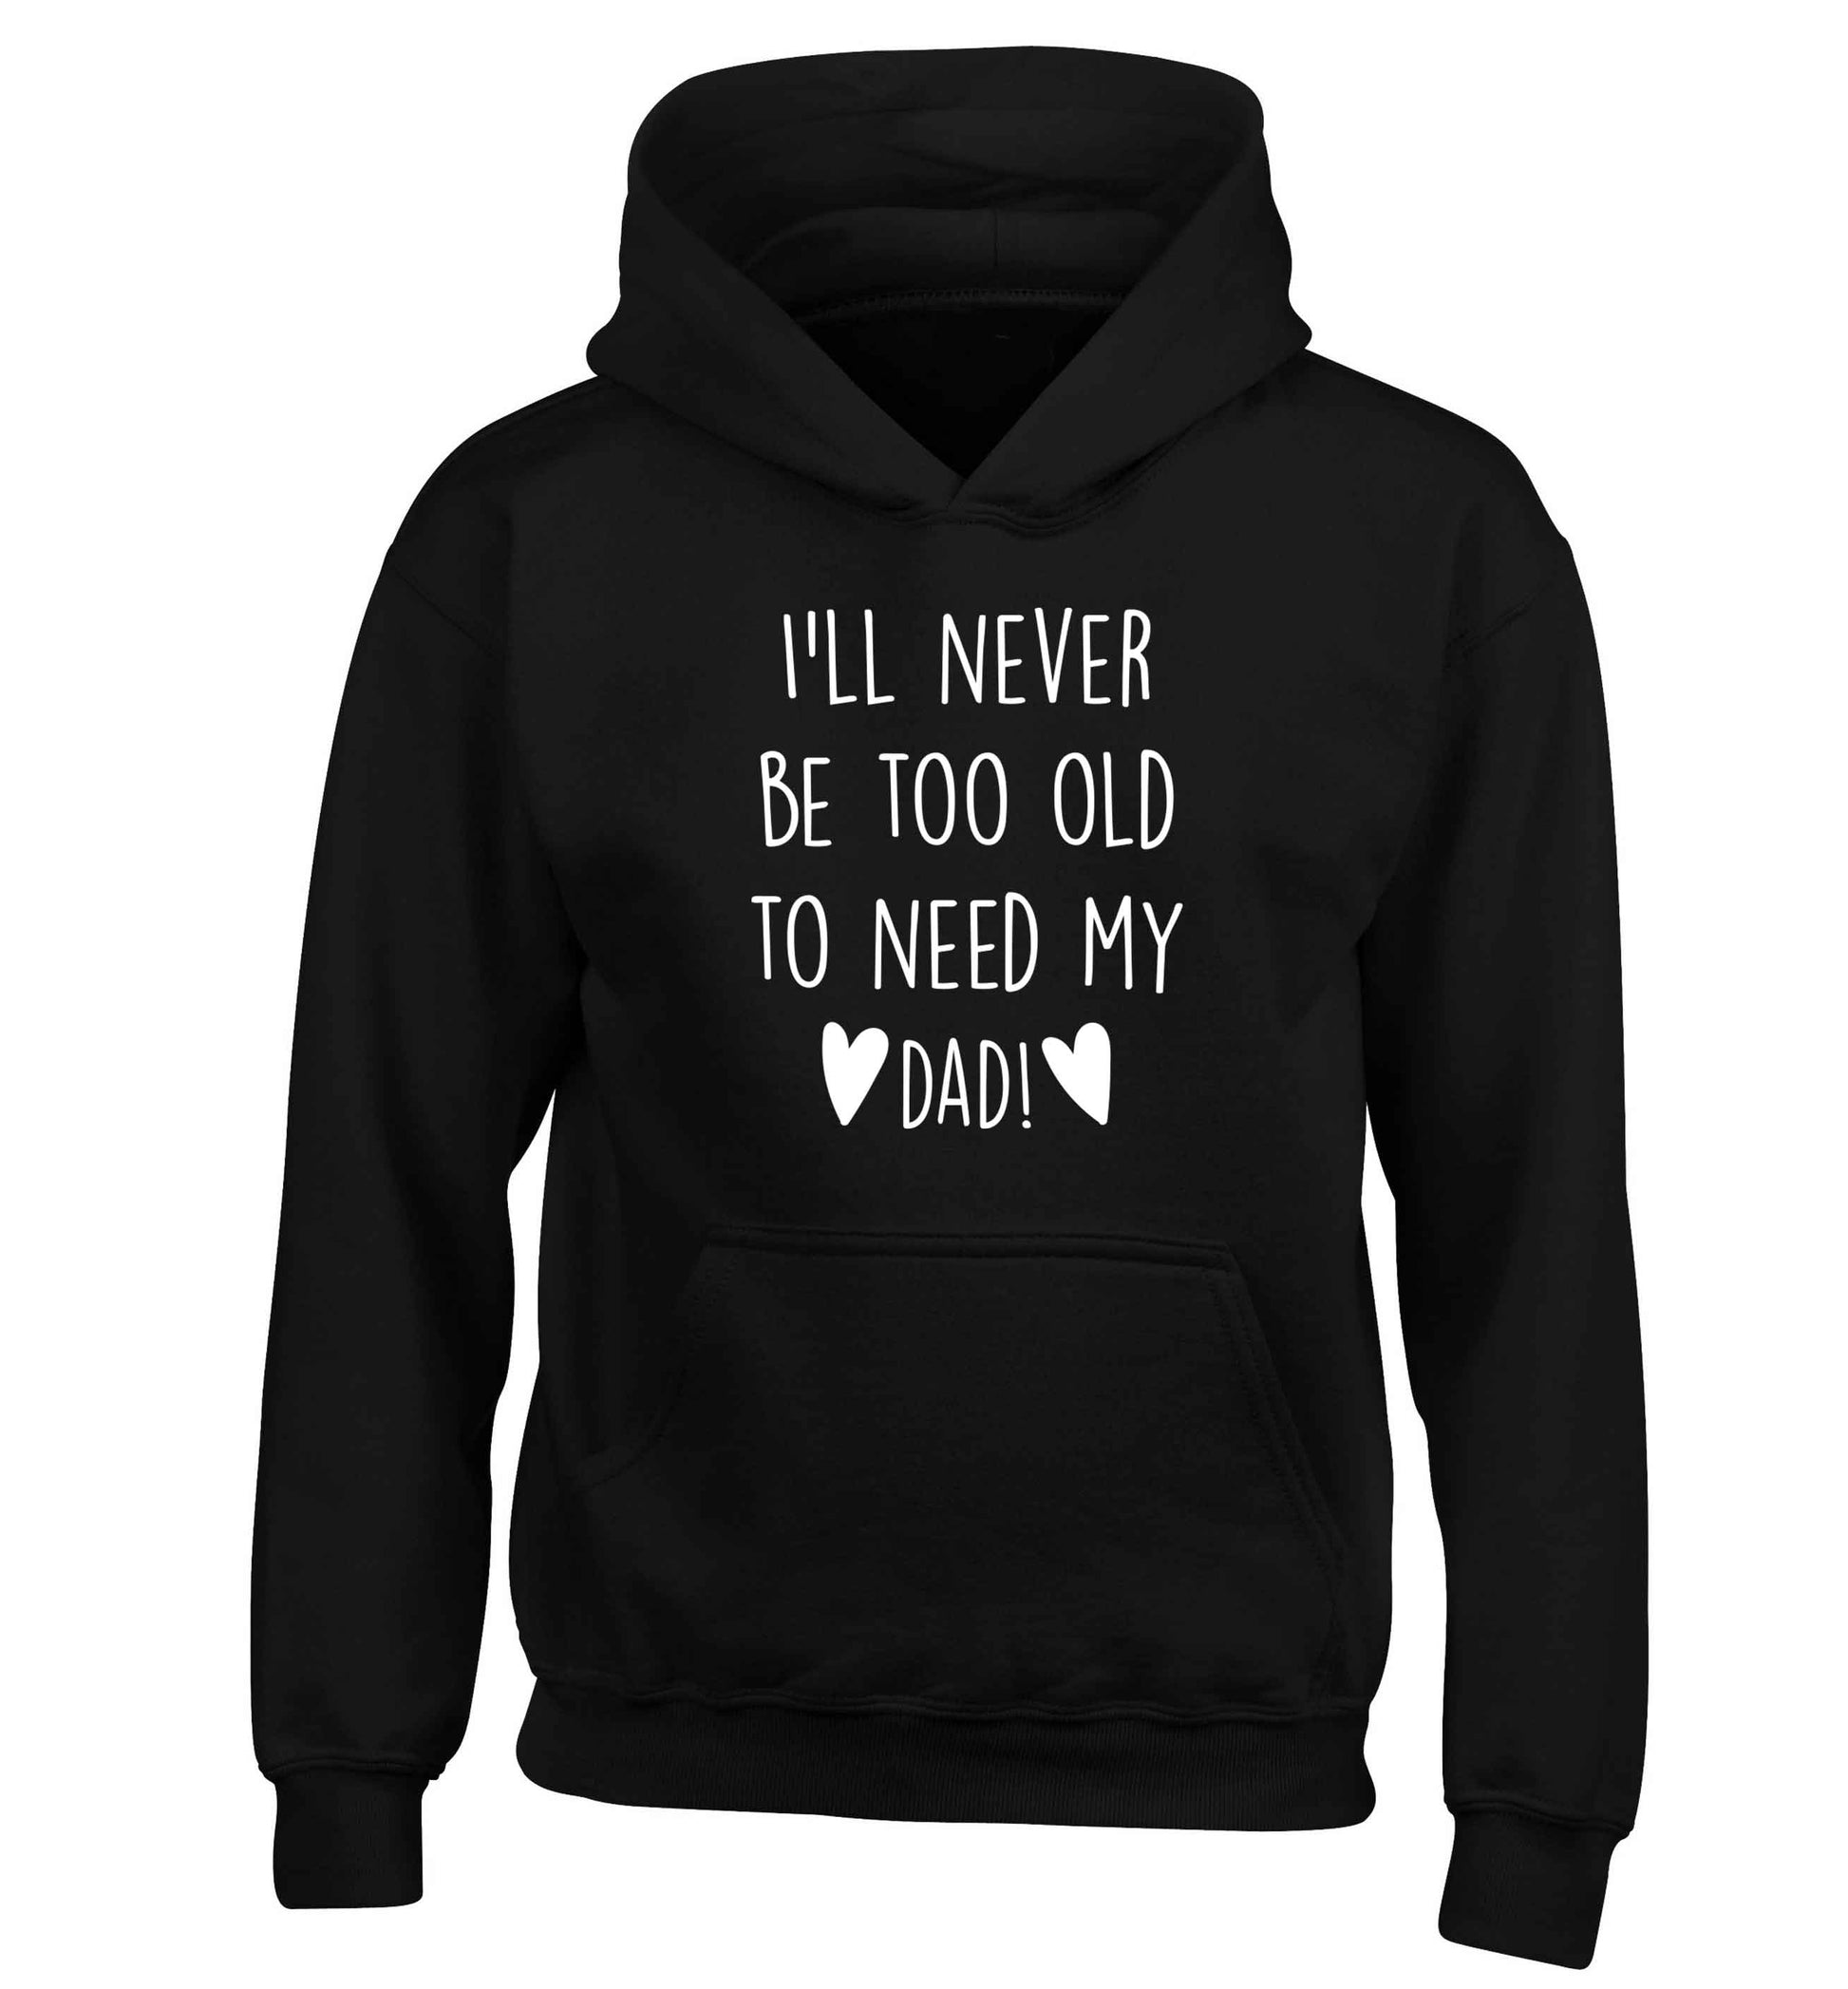 I'll never be too old to need my dad children's black hoodie 12-13 Years